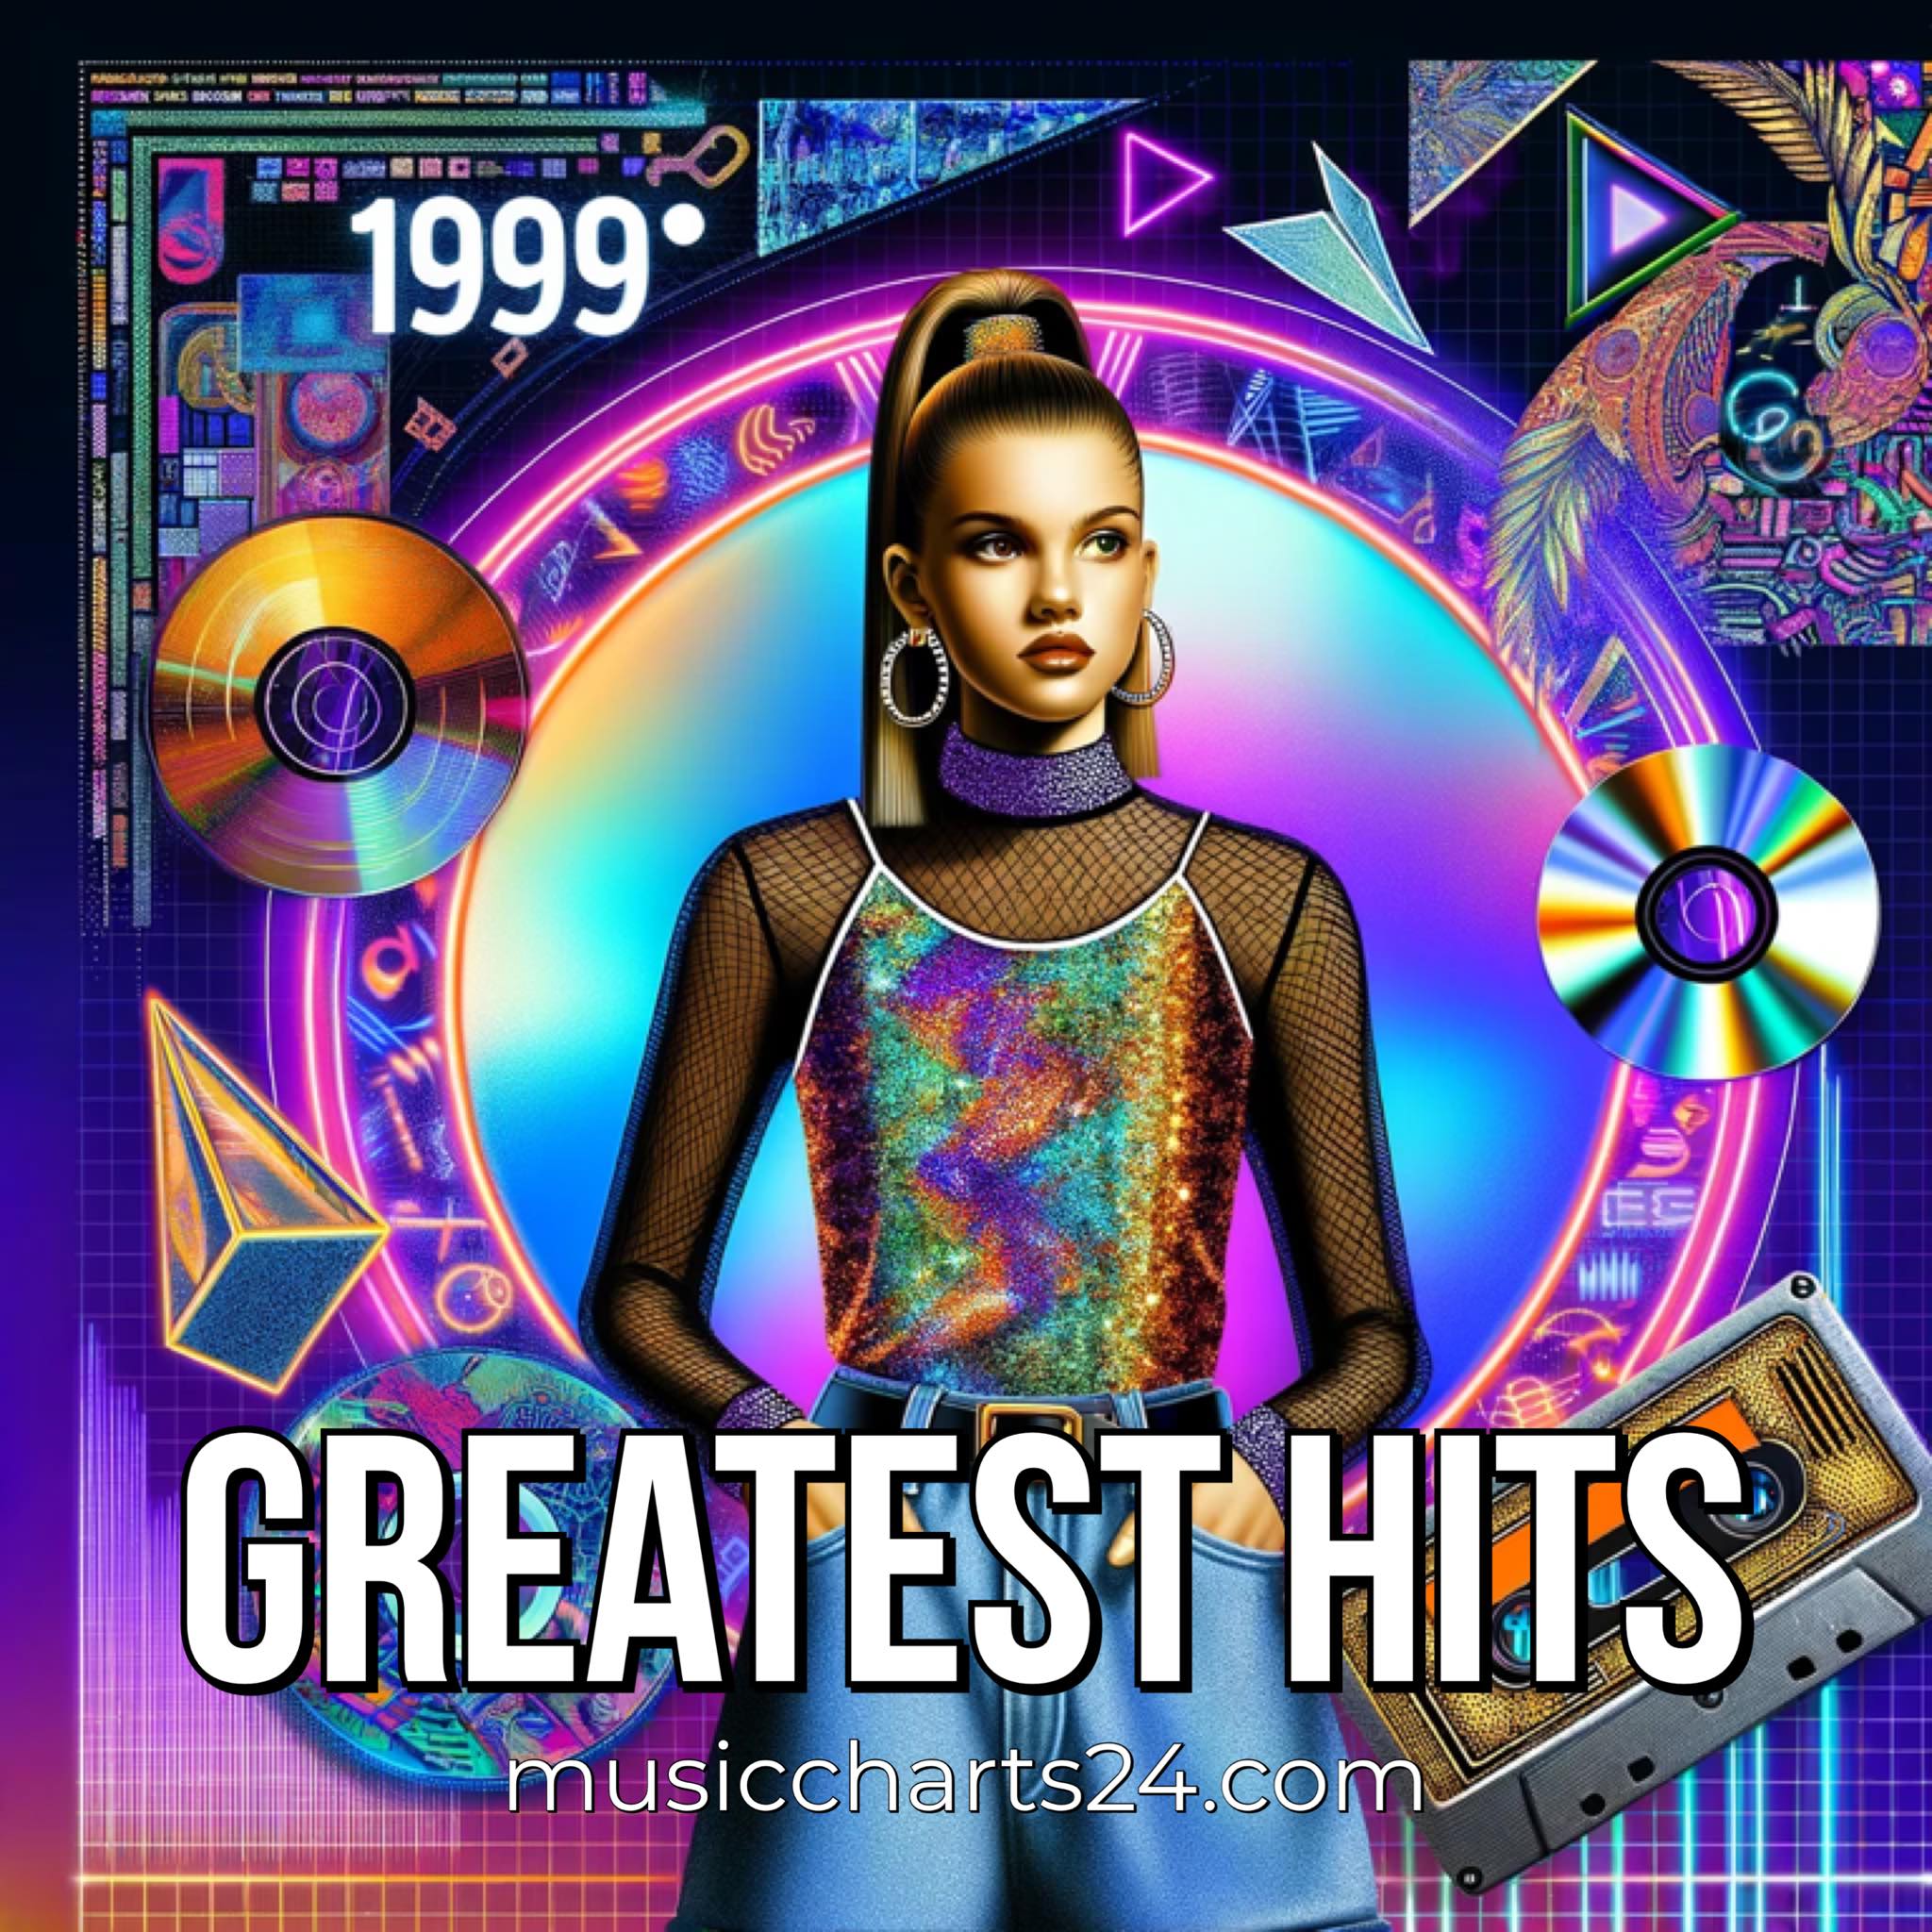 Rocking Down Memory Lane: 1999 Music Charts and the Greatest Hits of the Year